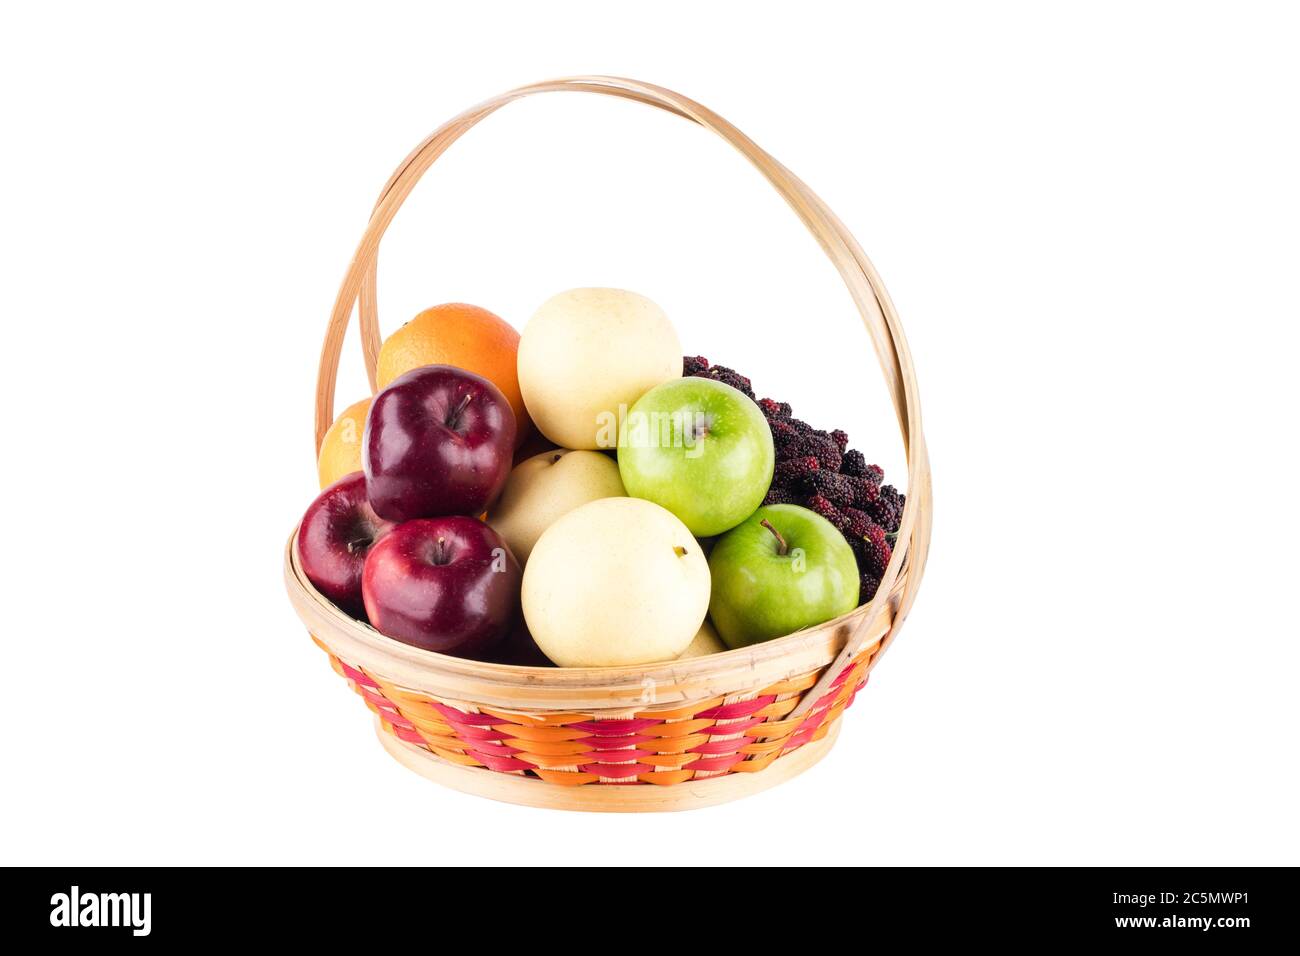 composition assorted fresh fruits such as orange, Chinese pear, mulberry, red apple and green applein  bamboo wicker basket on white background fruit Stock Photo